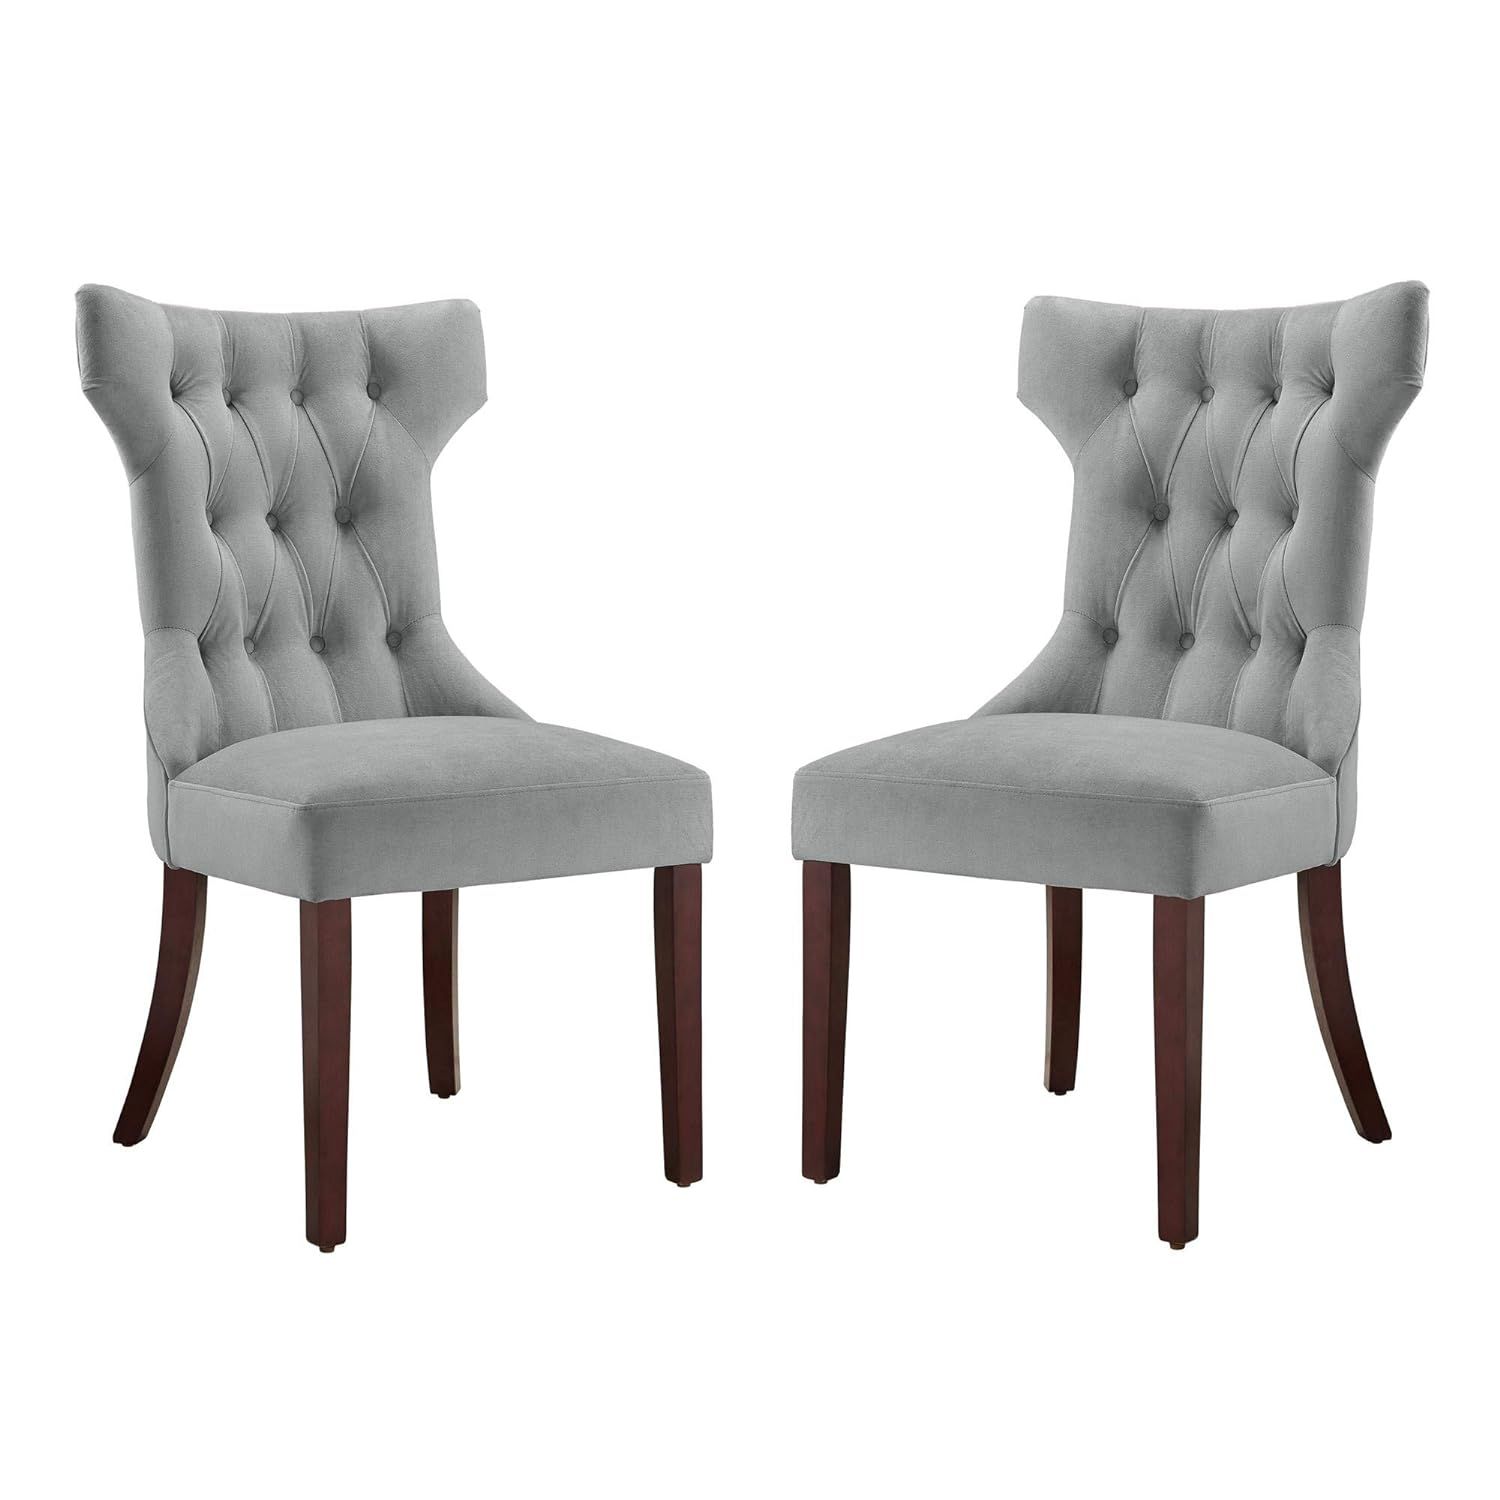 Dorel Living DA6090-PL Clairborne Upholstered dining chair, set of 2, Gray | Amazon (US)